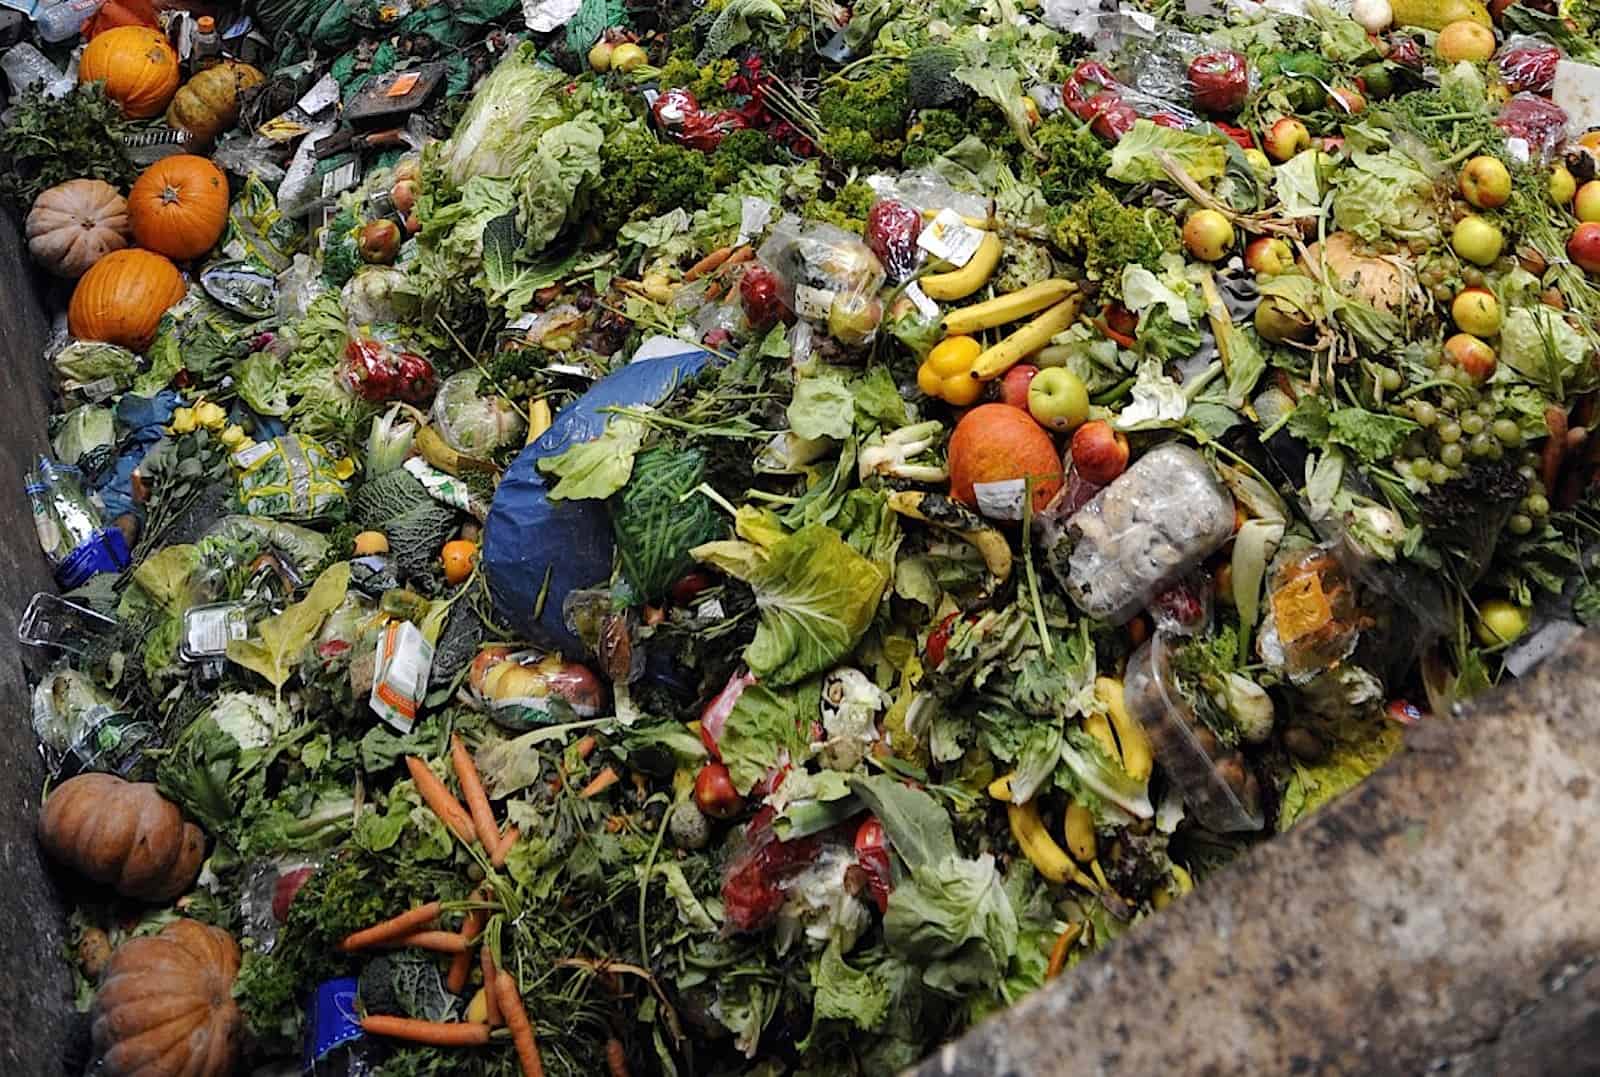 Anti-Gaspillage: France Rallies Against Food Waste